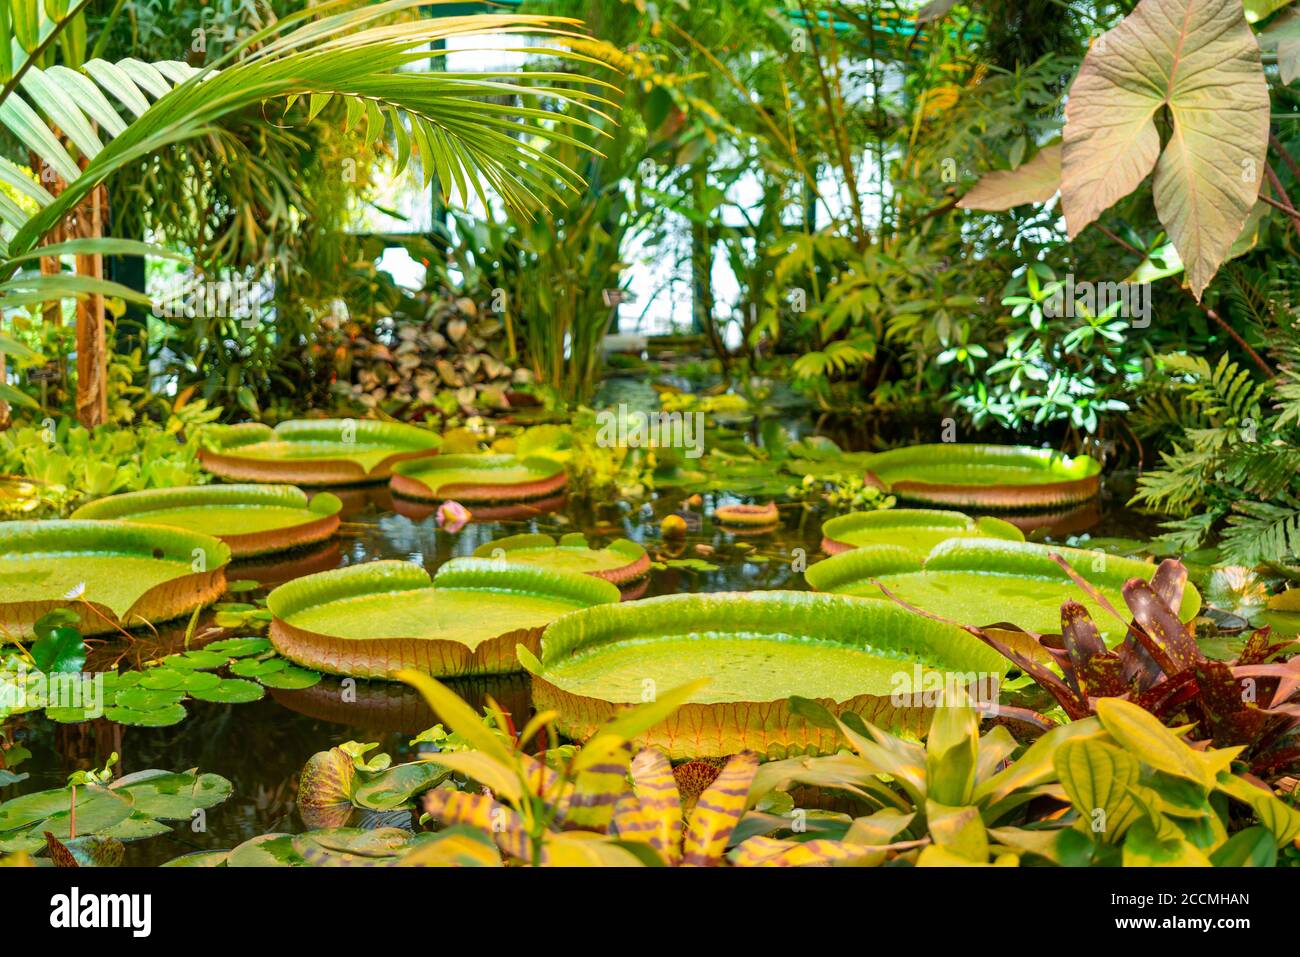 The giant leaves of the aquatic plant Victoria. Tropical plants in the greenhouse. Stock Photo